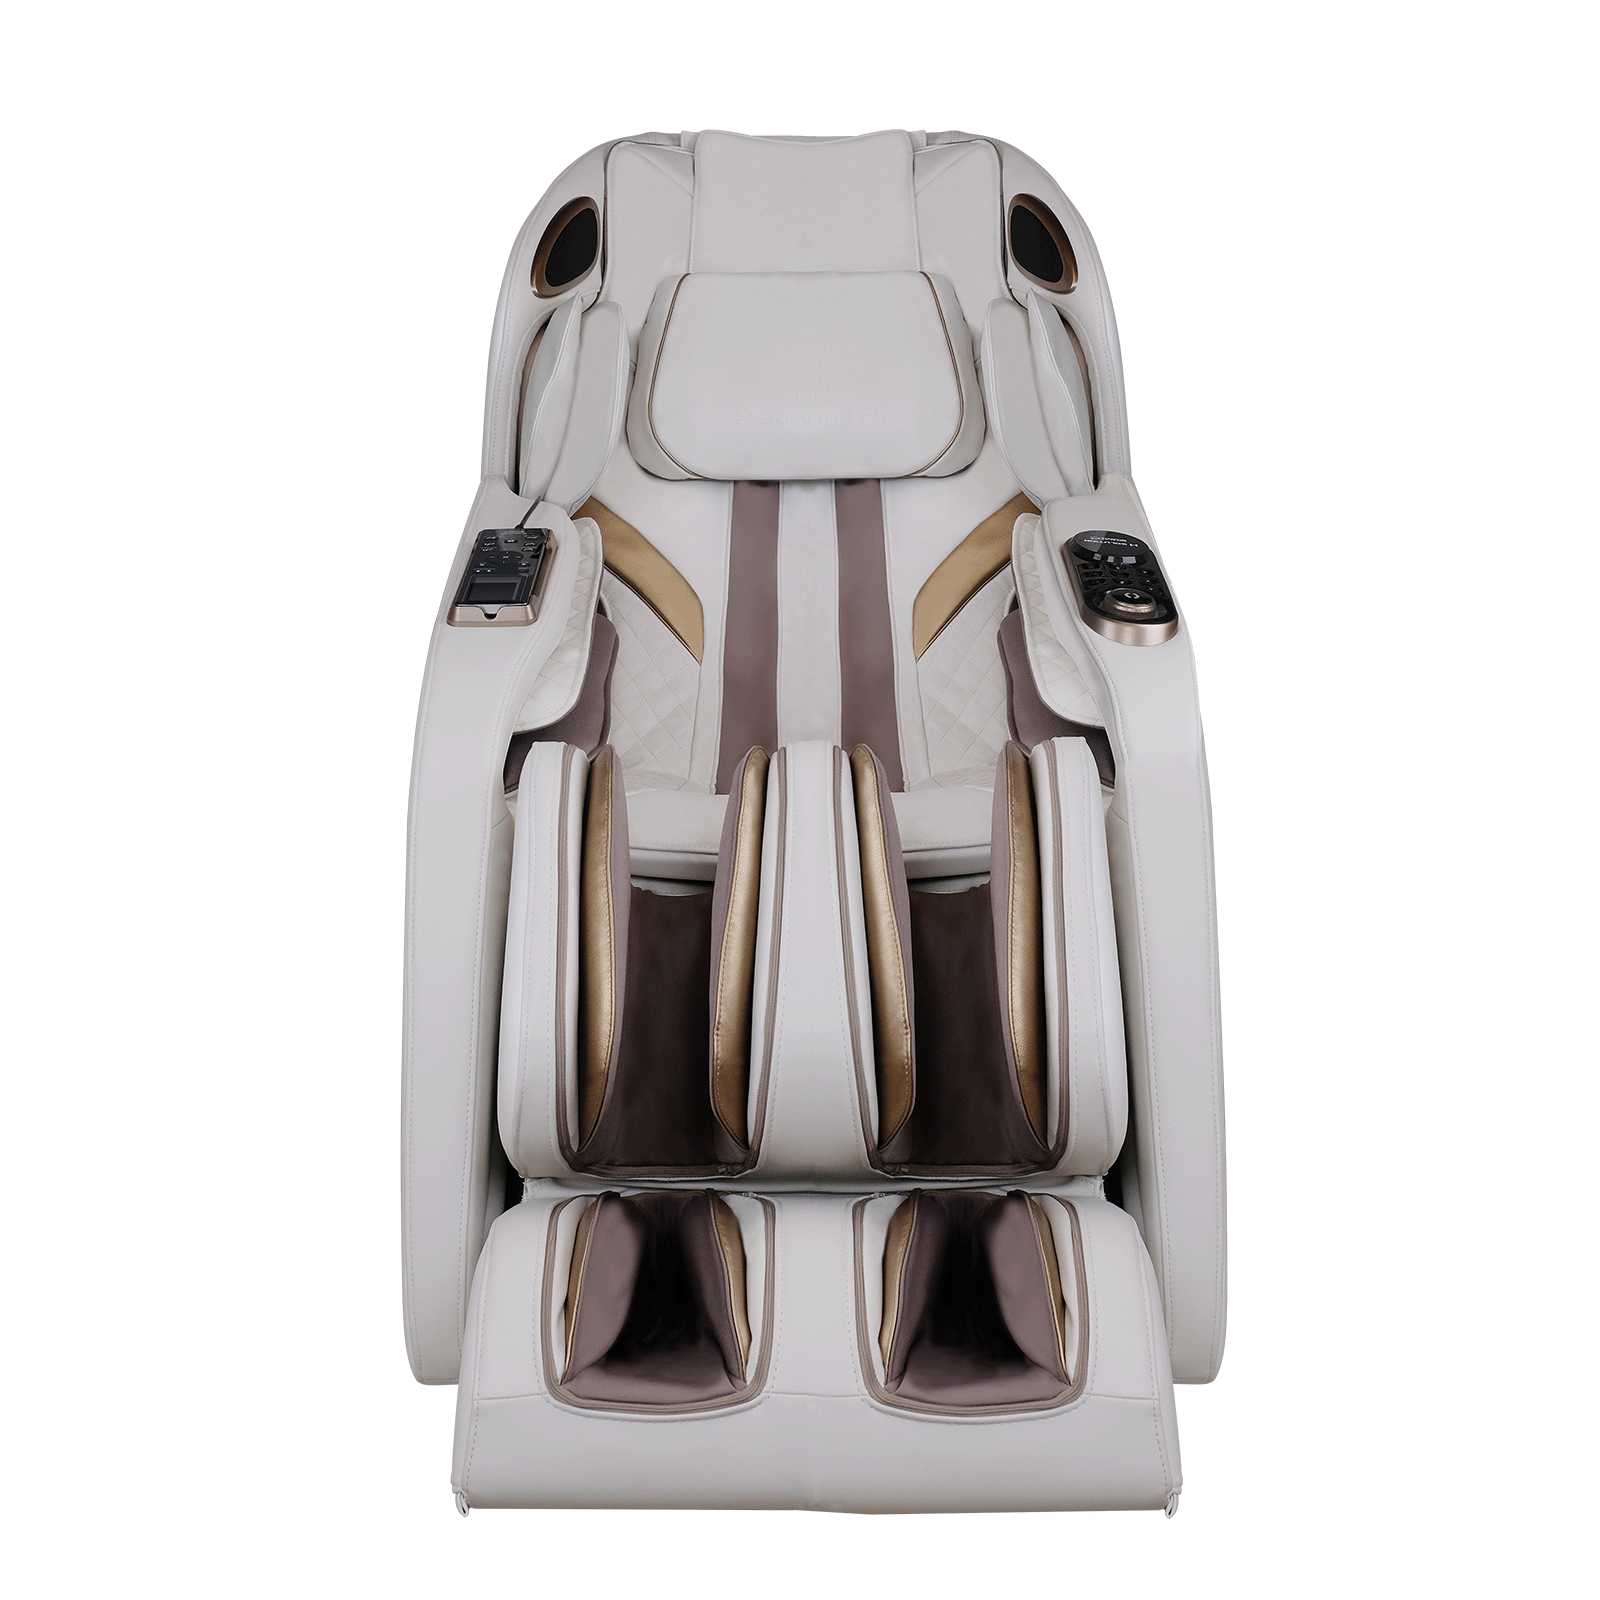 H Solution Gravity TURBO Massage Chair (Ivory)